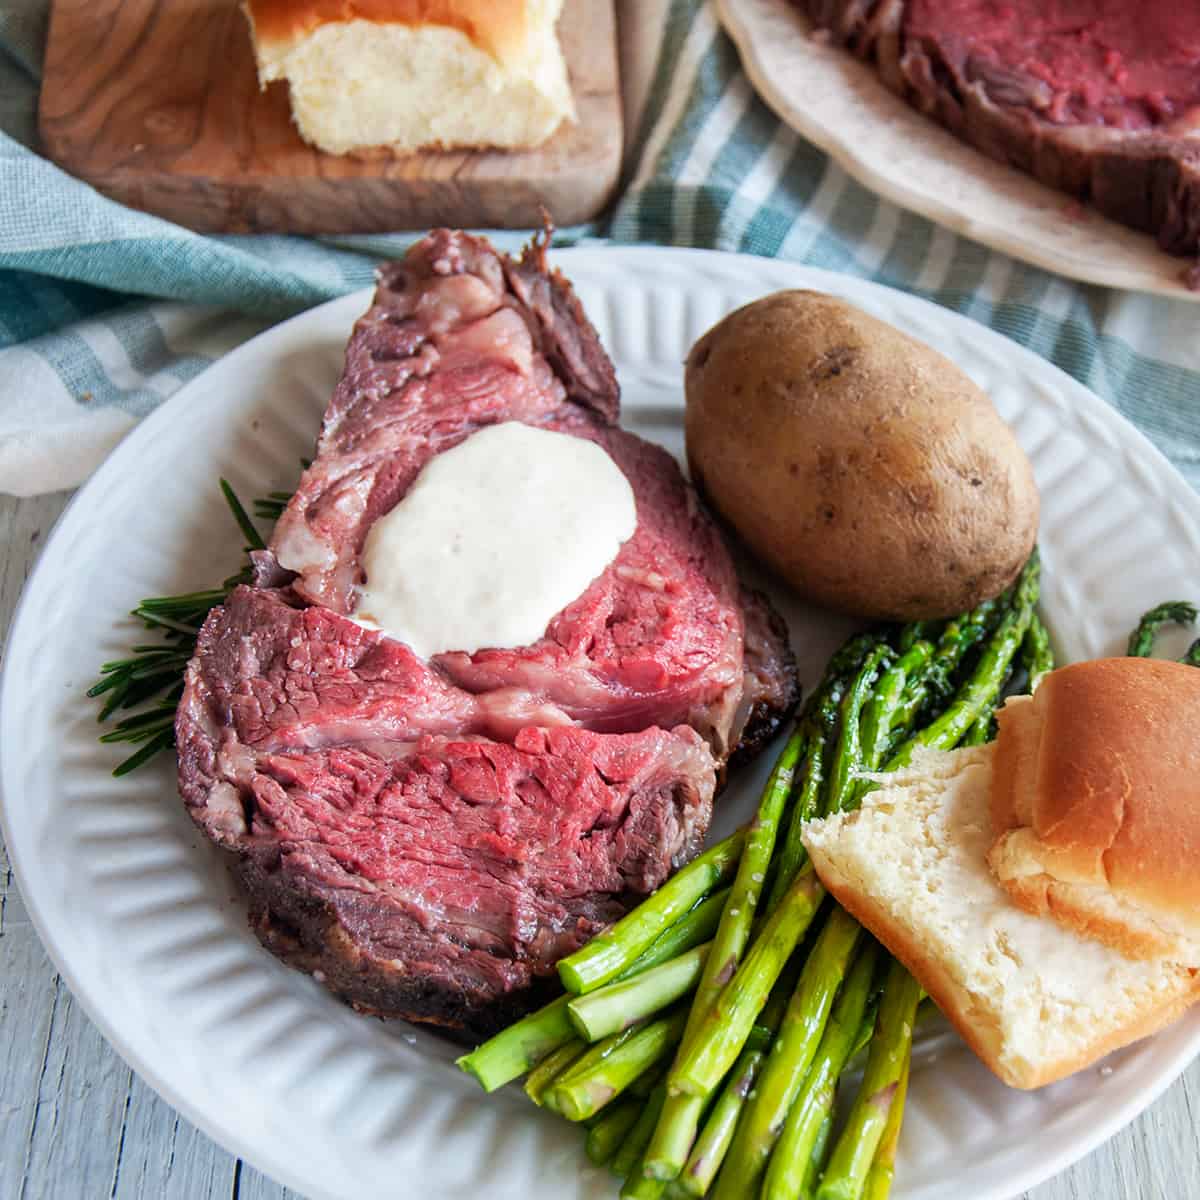 Slice of Prime Rib on a white plate being served with asparagus, a bun, a baked potato, and the entire roast barely showing in the background.